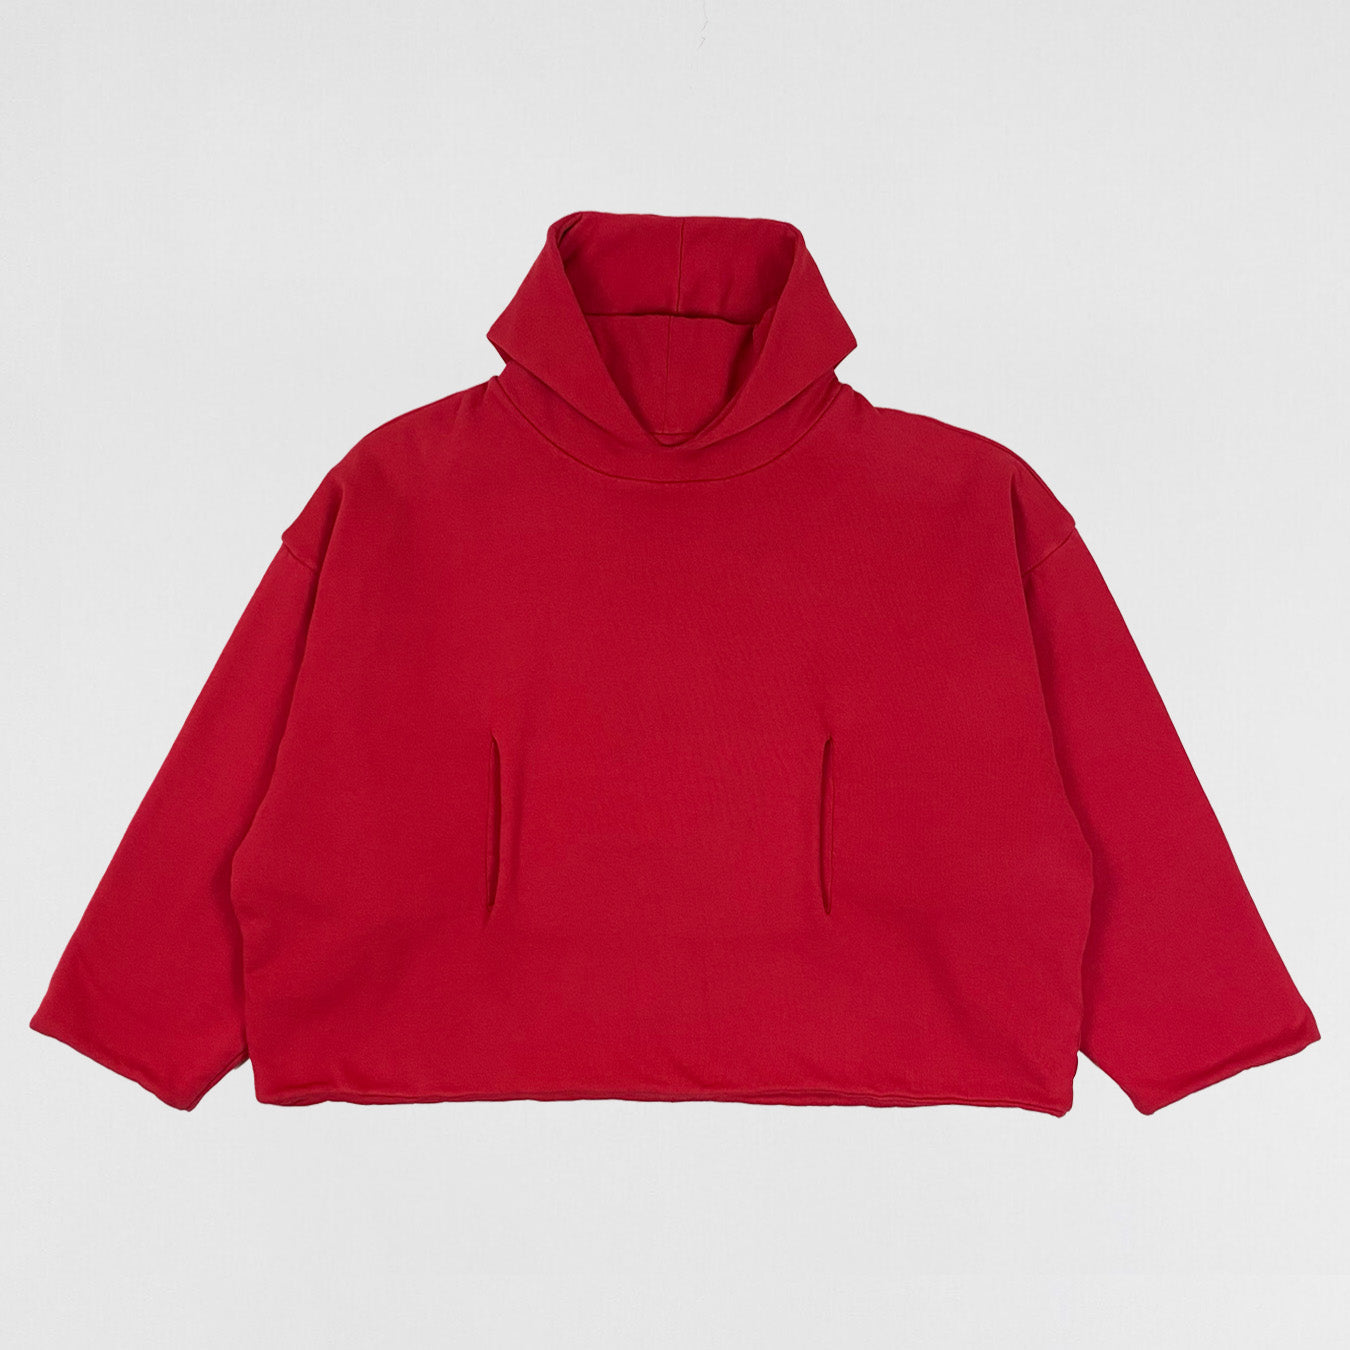 YZY 2021 Unreleased Sunday Service Double Layered Hoodie